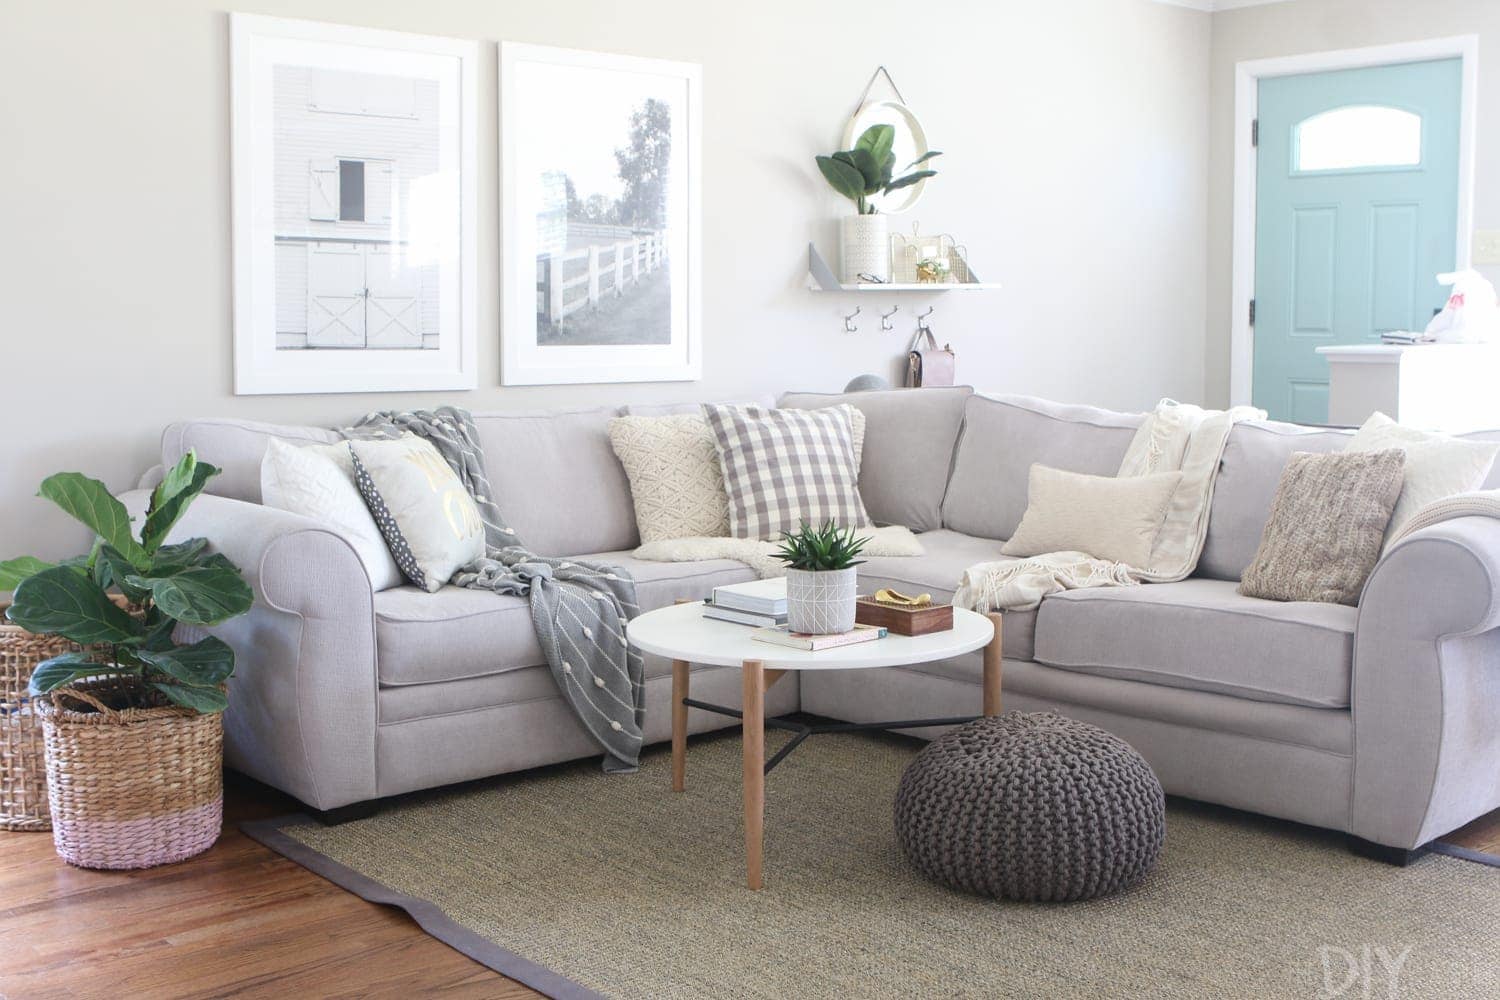 Avoid buying a rug that is too small with these tips for buying the right size rug.